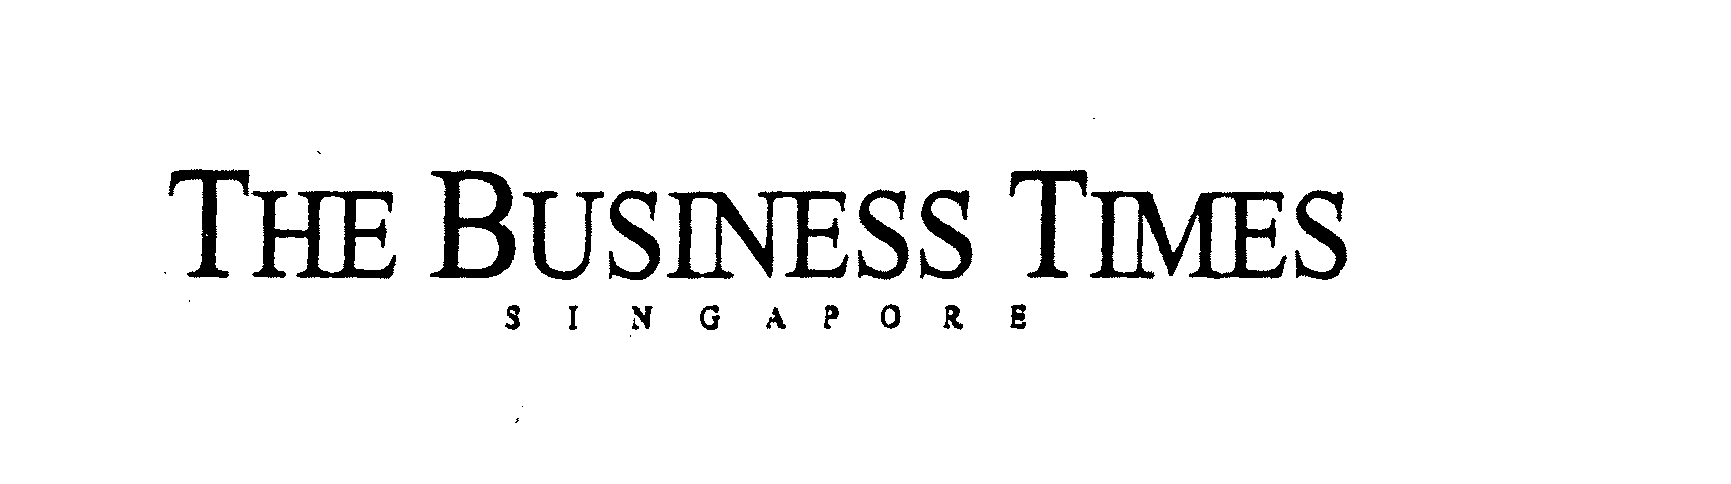 THE BUSINESS TIMES SINGAPORE